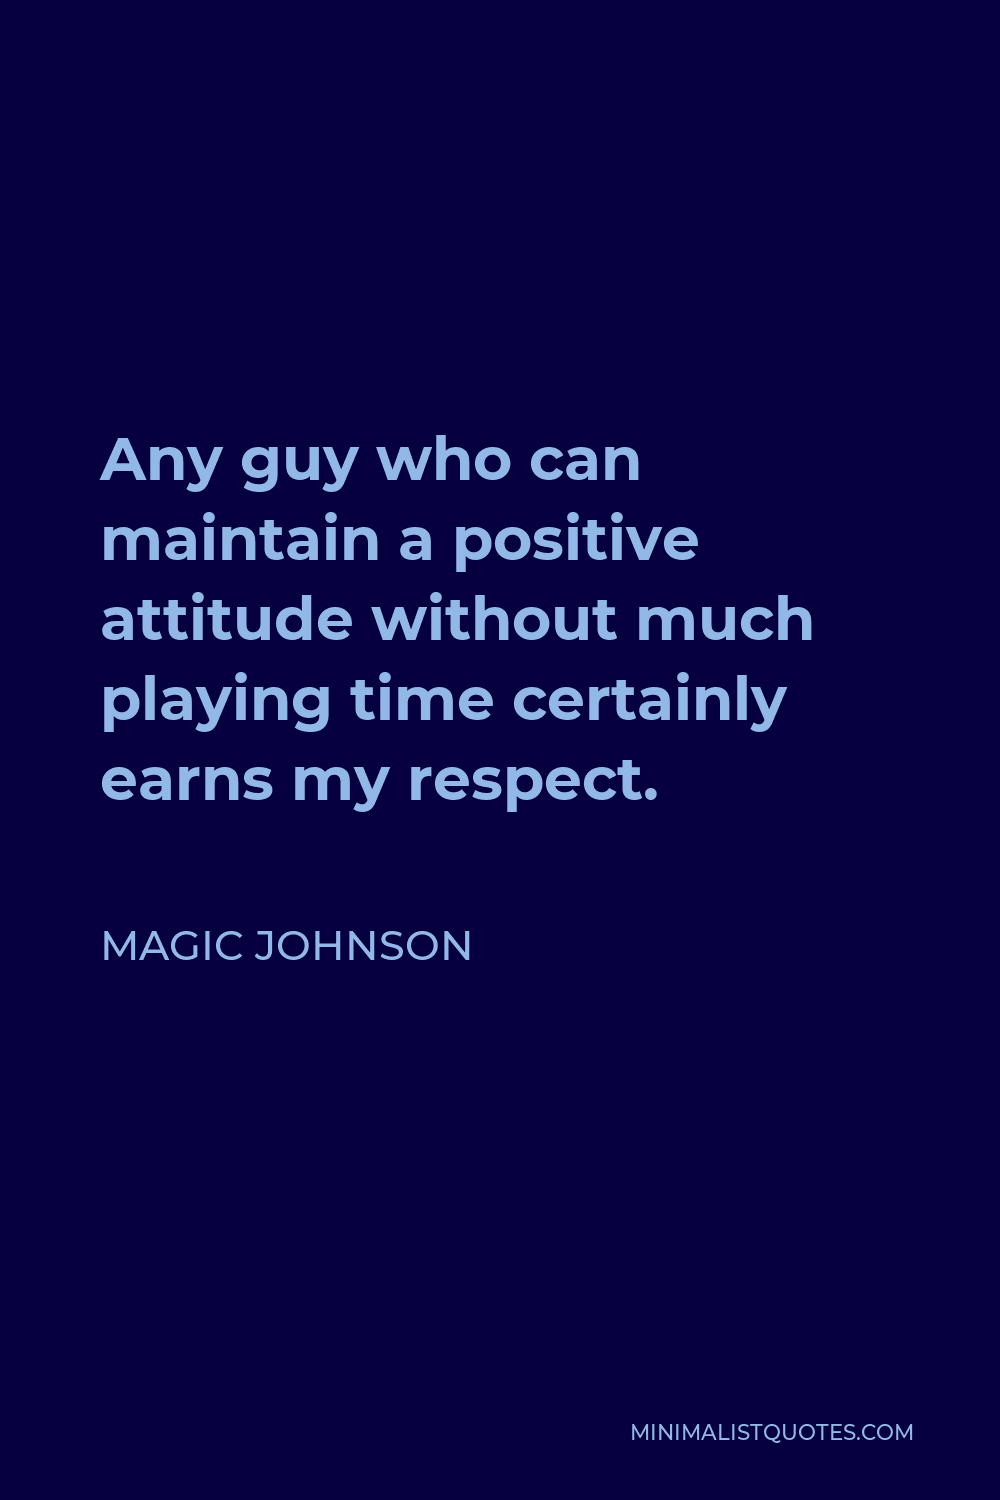 Magic Johnson Quote - Any guy who can maintain a positive attitude without much playing time certainly earns my respect.